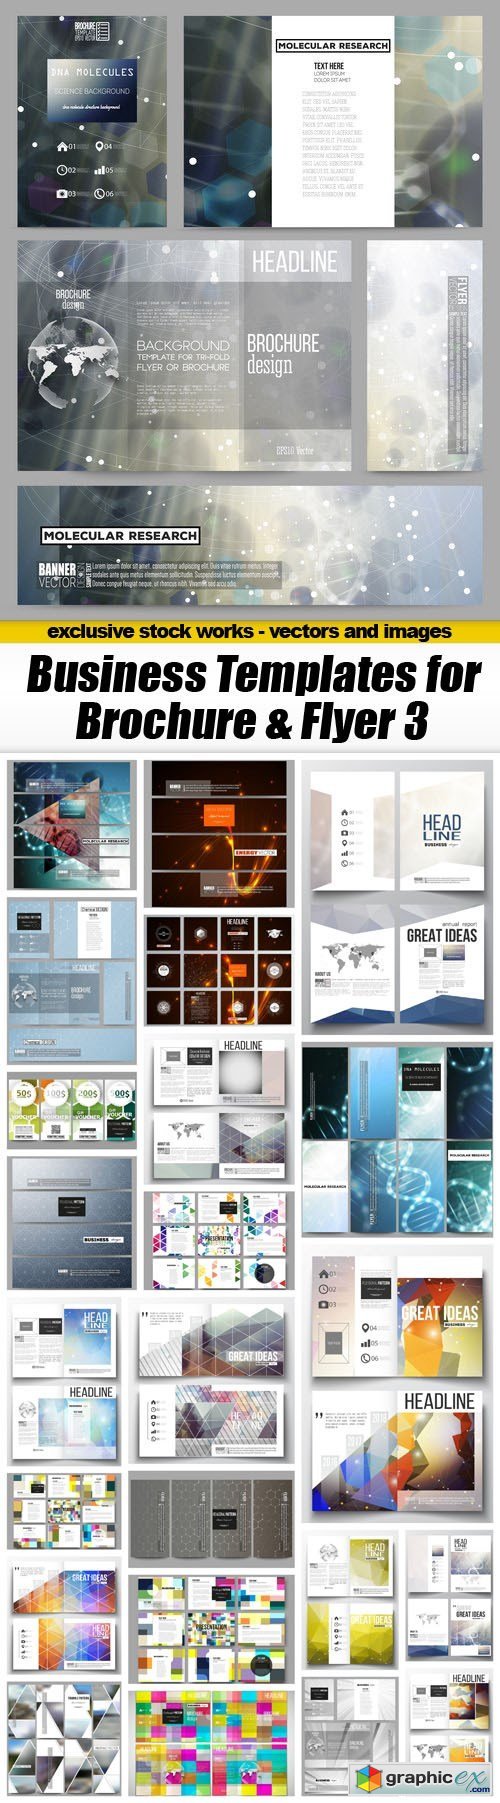 Business Templates for Brochure & Flyer 3 - 25xEPS